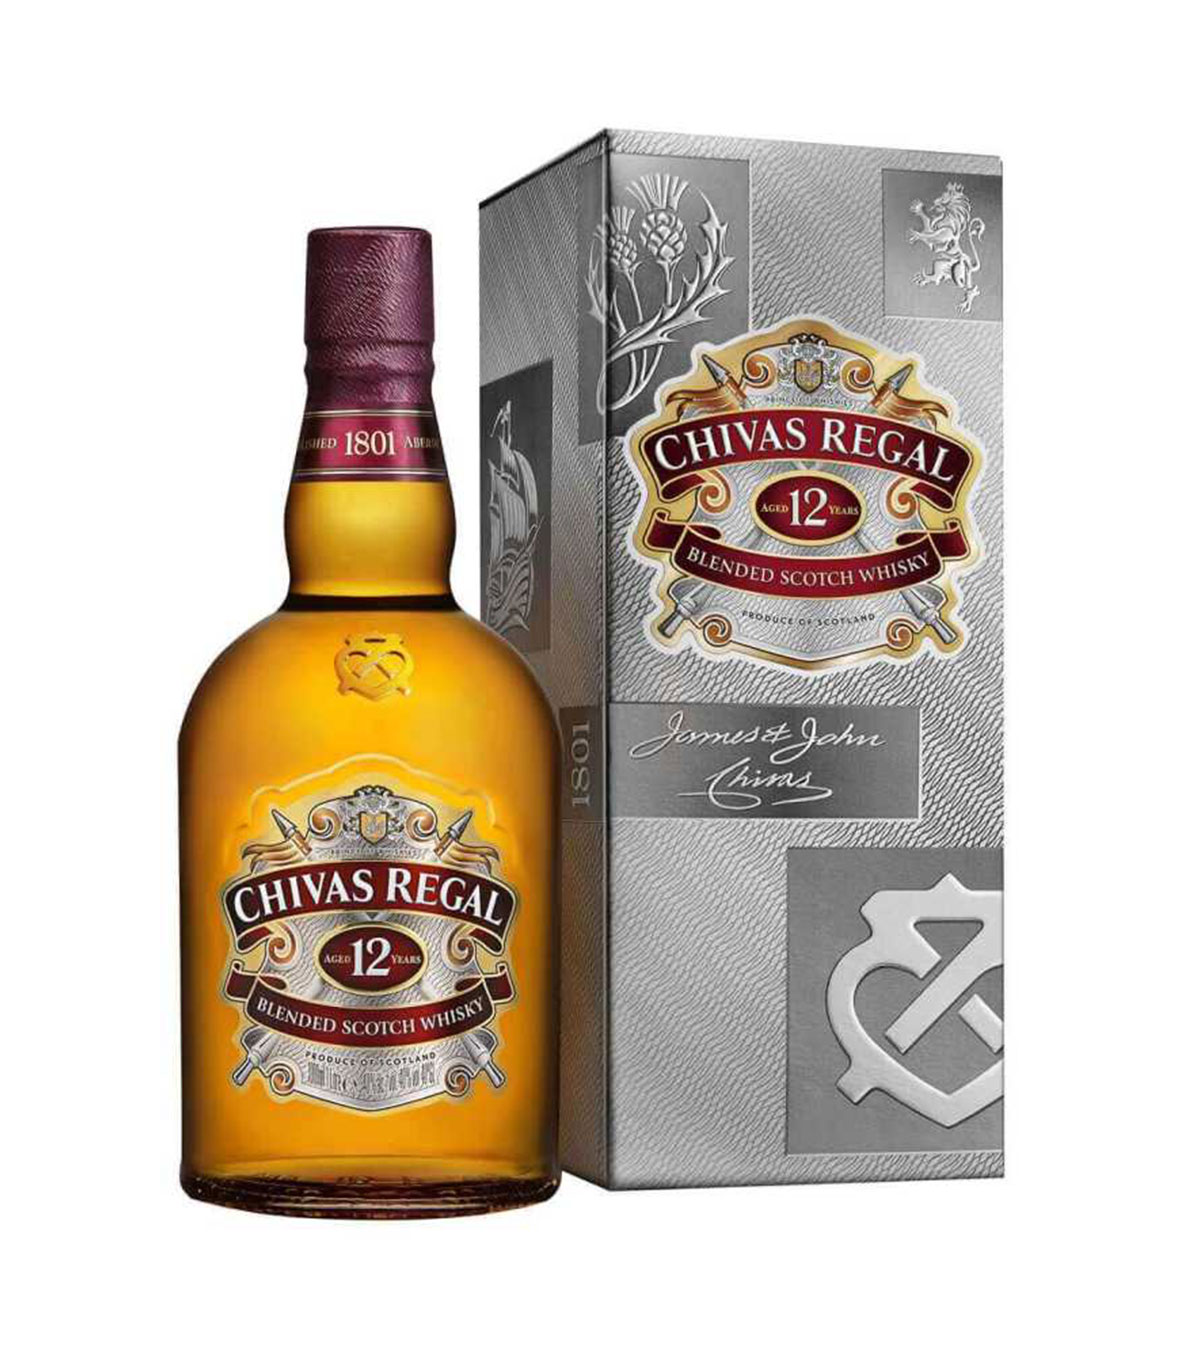 Chivas 25 Years Boxed Bottle At The Best Price. Buy Cheap With Bargains